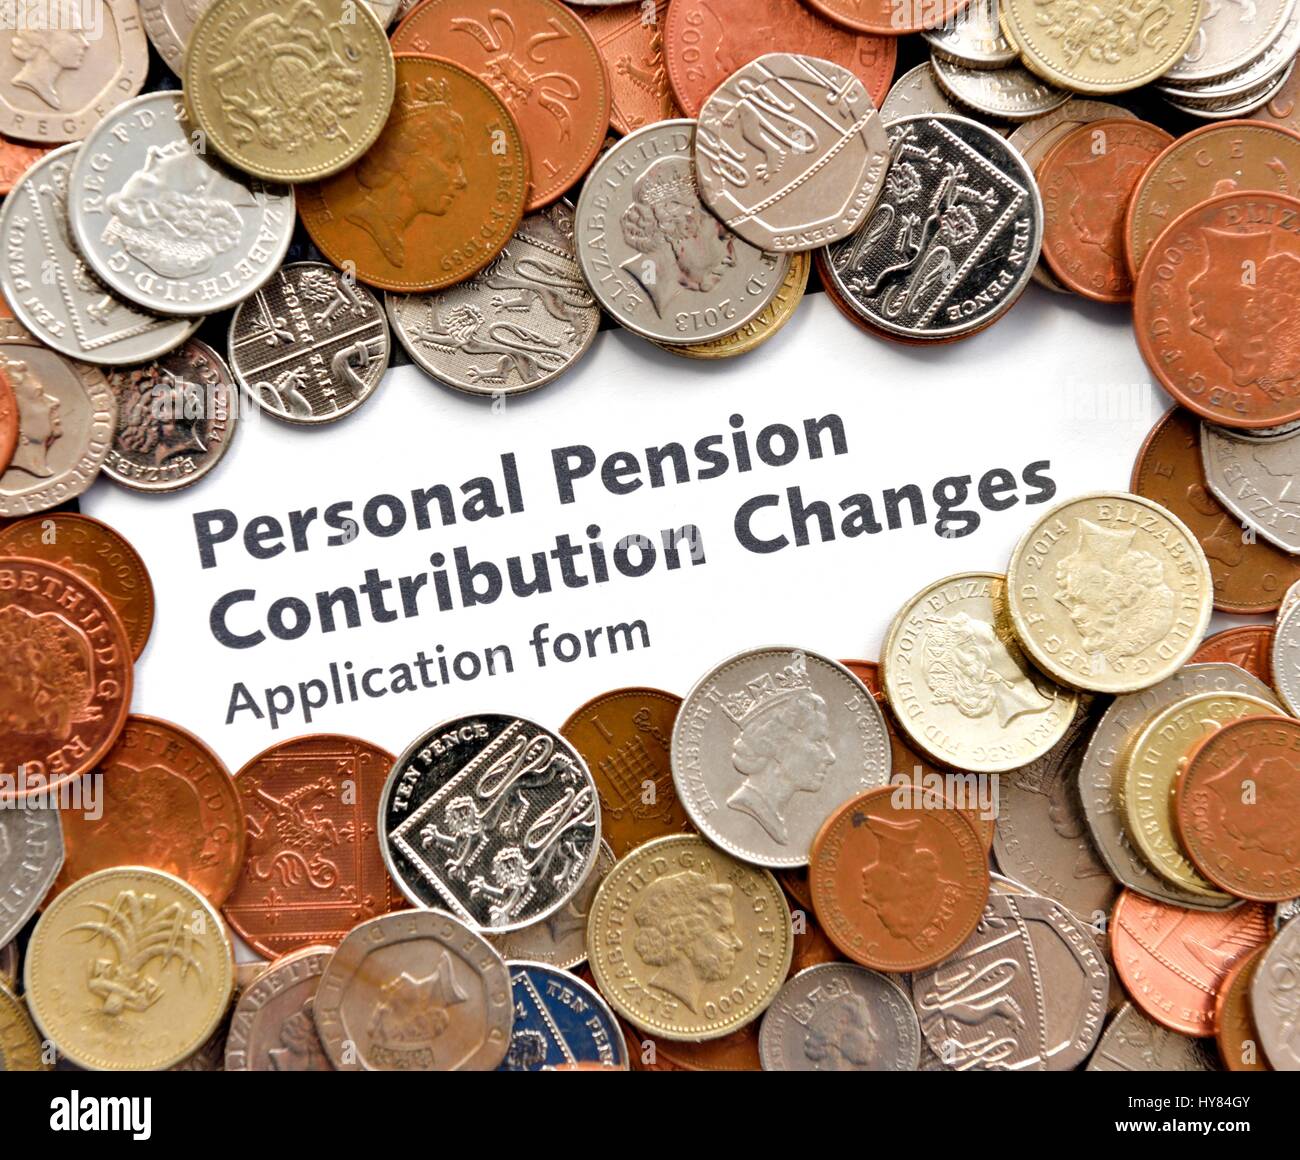 Personal pension contribution changes Stock Photo